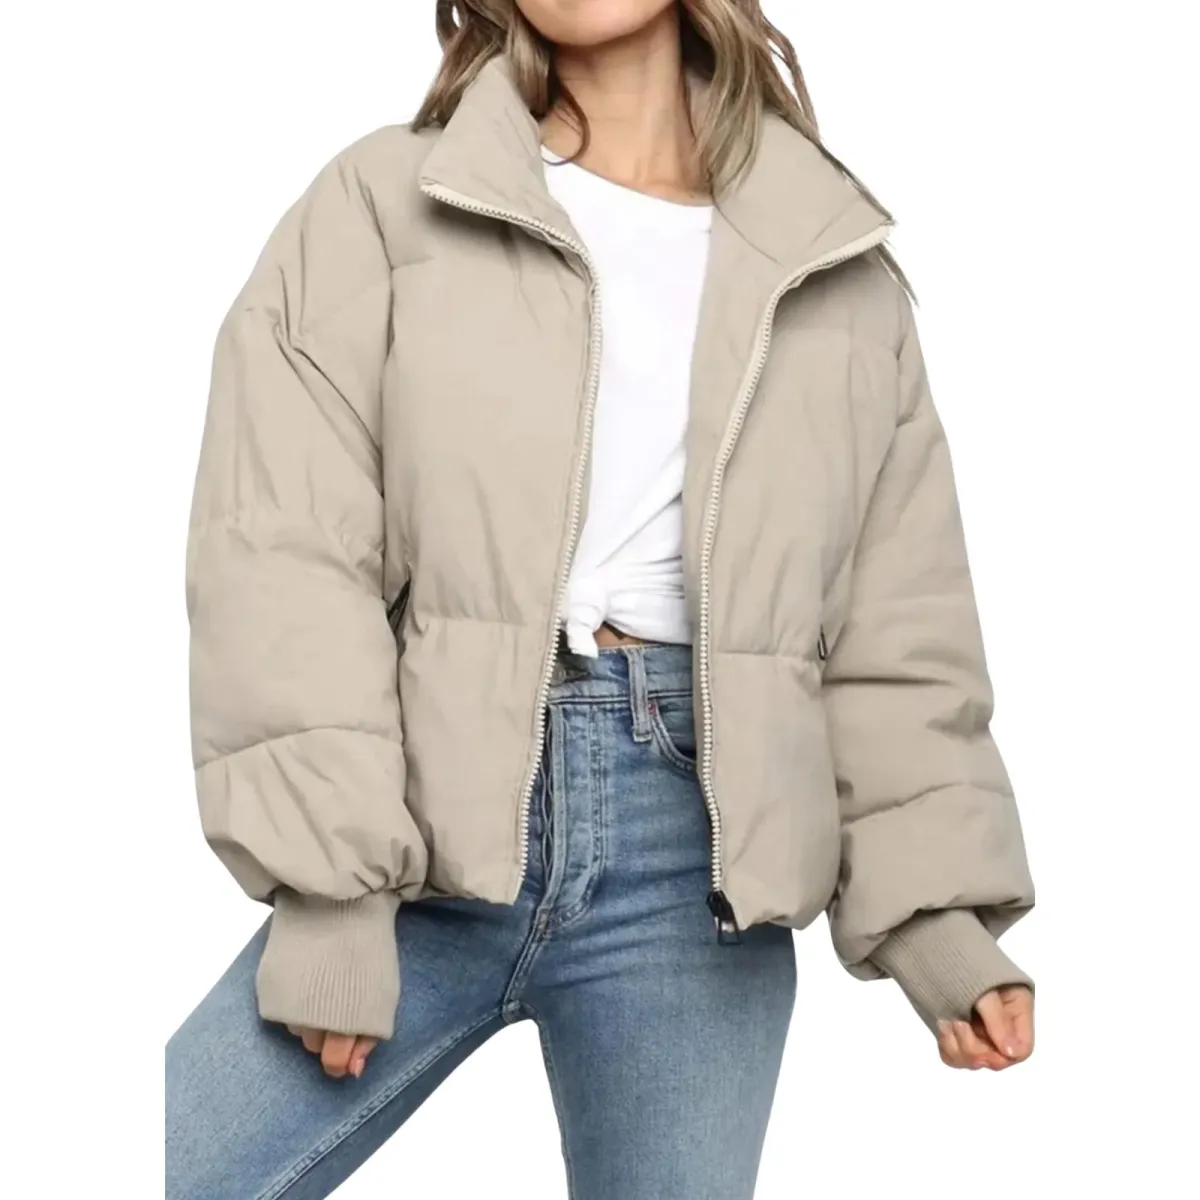 Top Of The Line Premium Quality Custom Made Puffer Jackets For Women.